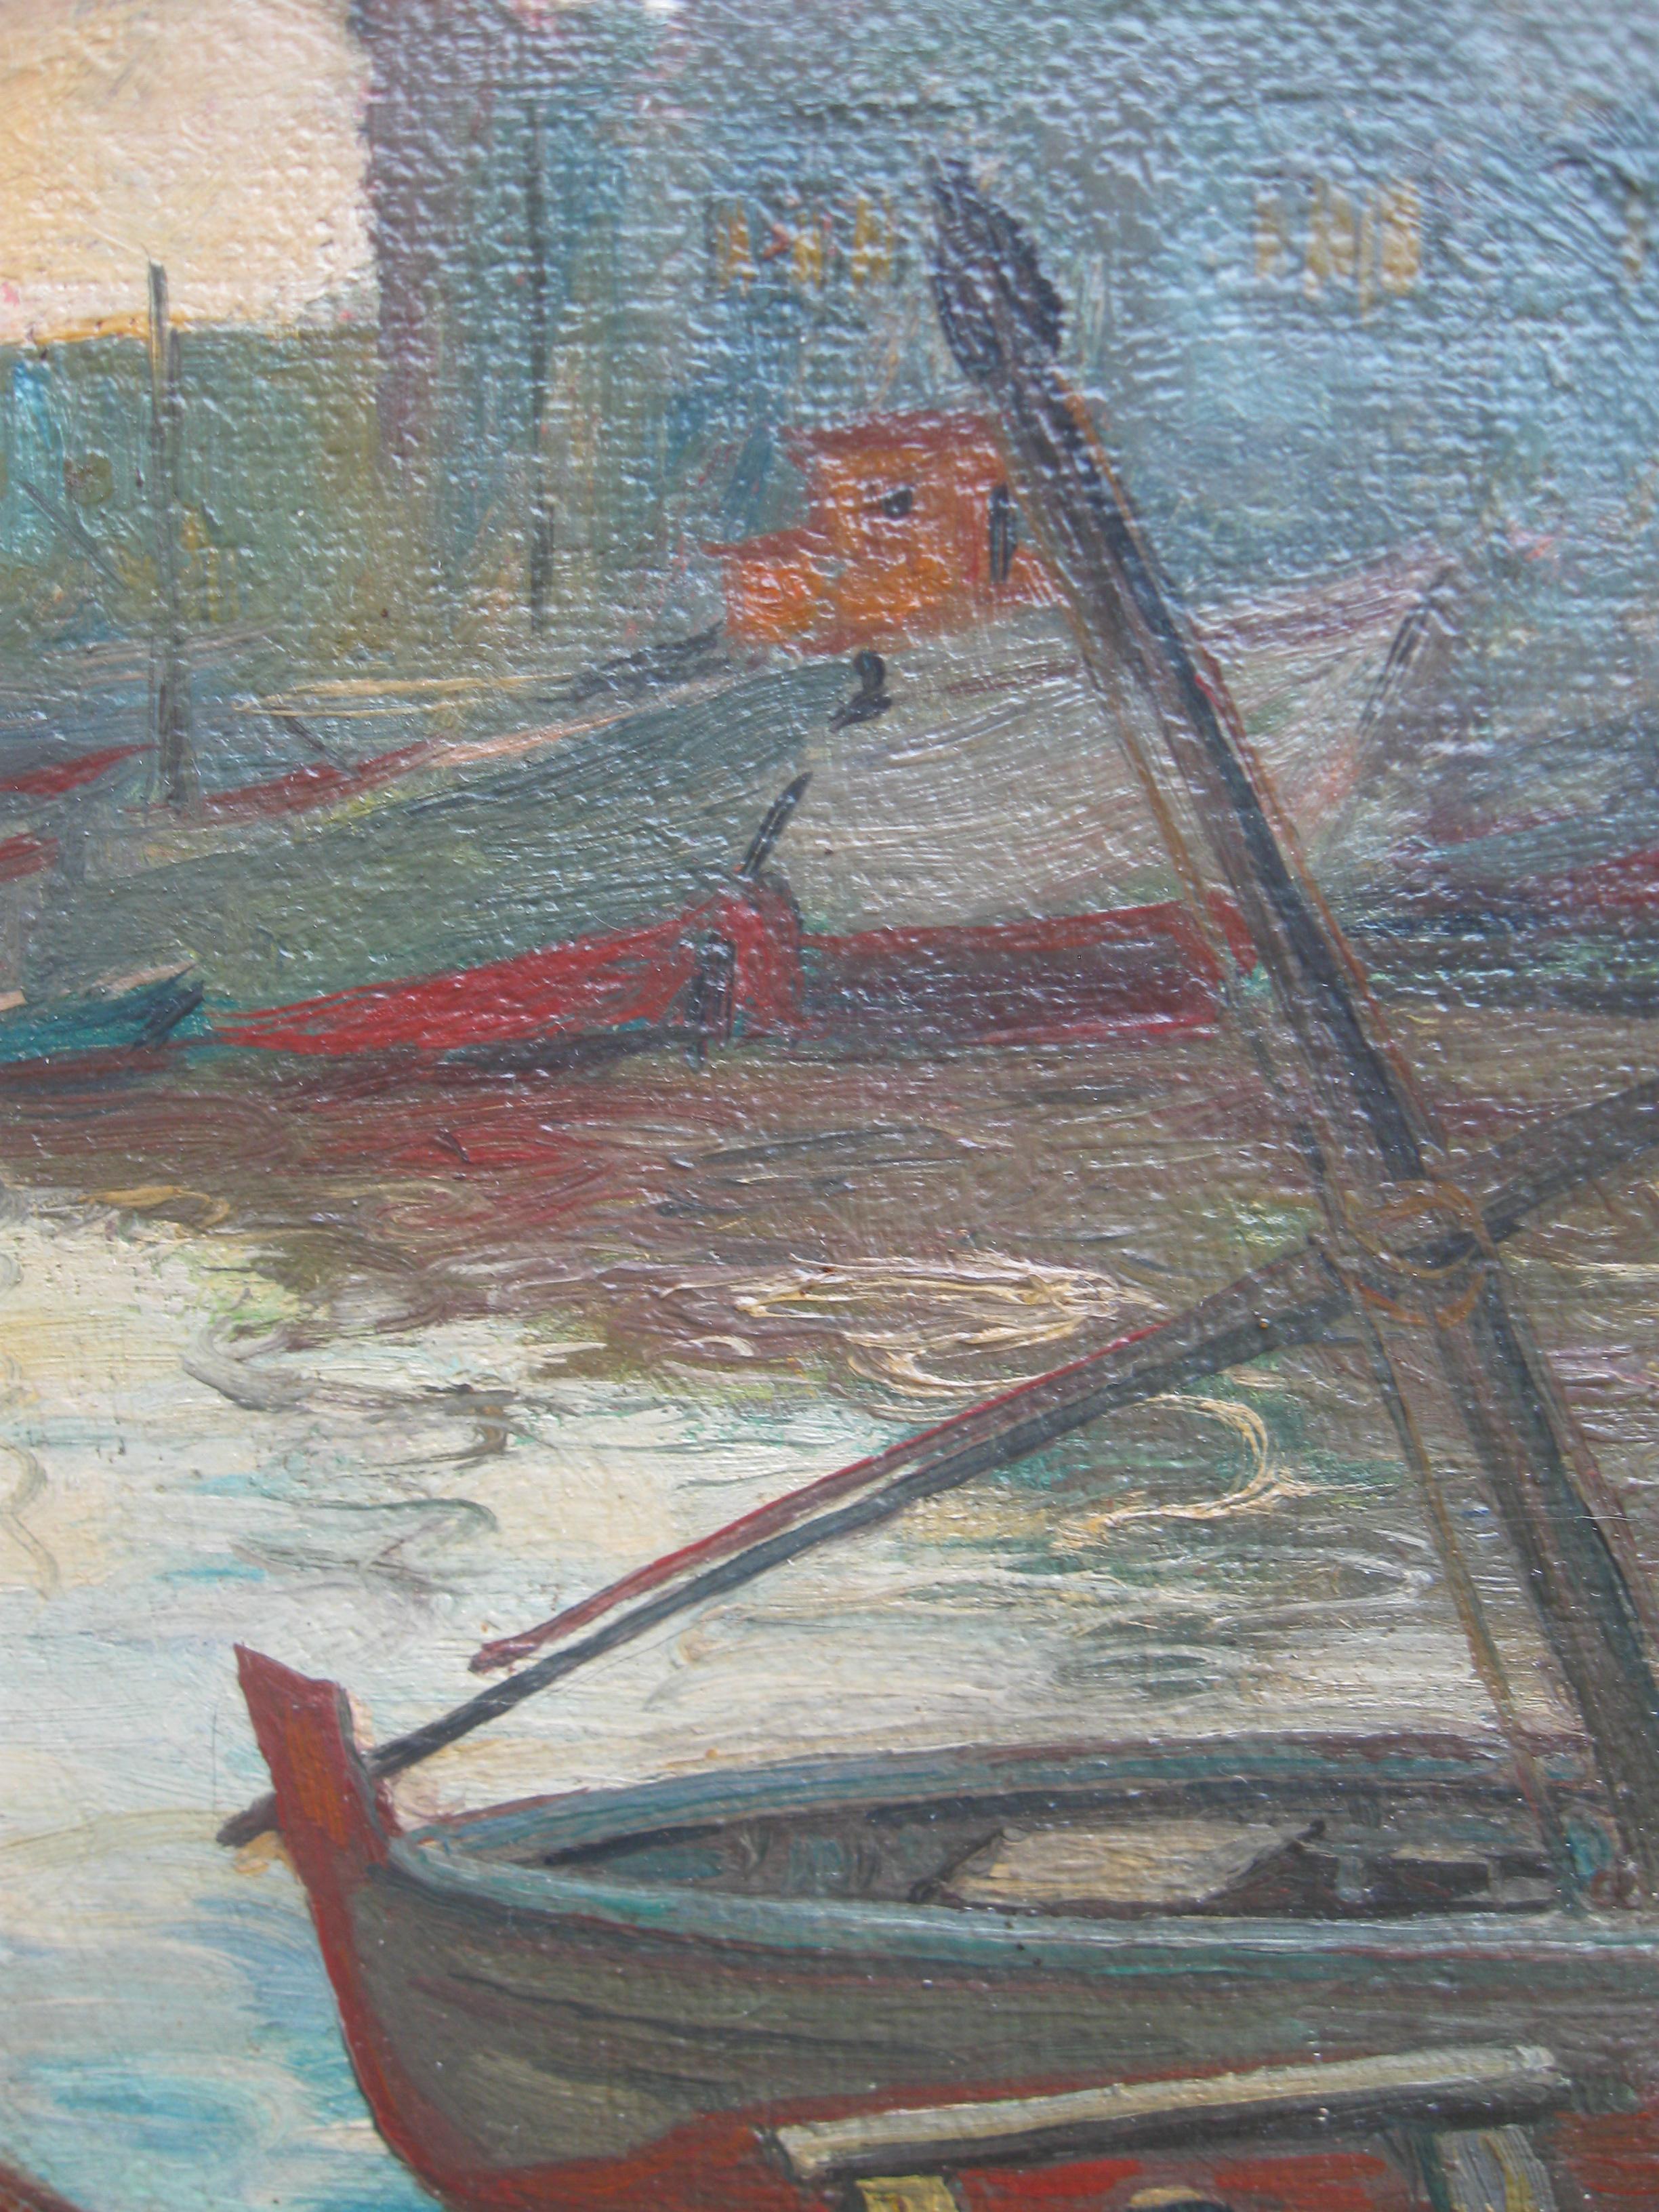 'Landing the Catch', Harbour Evening Scene oil on canvas circa 1950's - Gray Figurative Painting by Leroy Querol